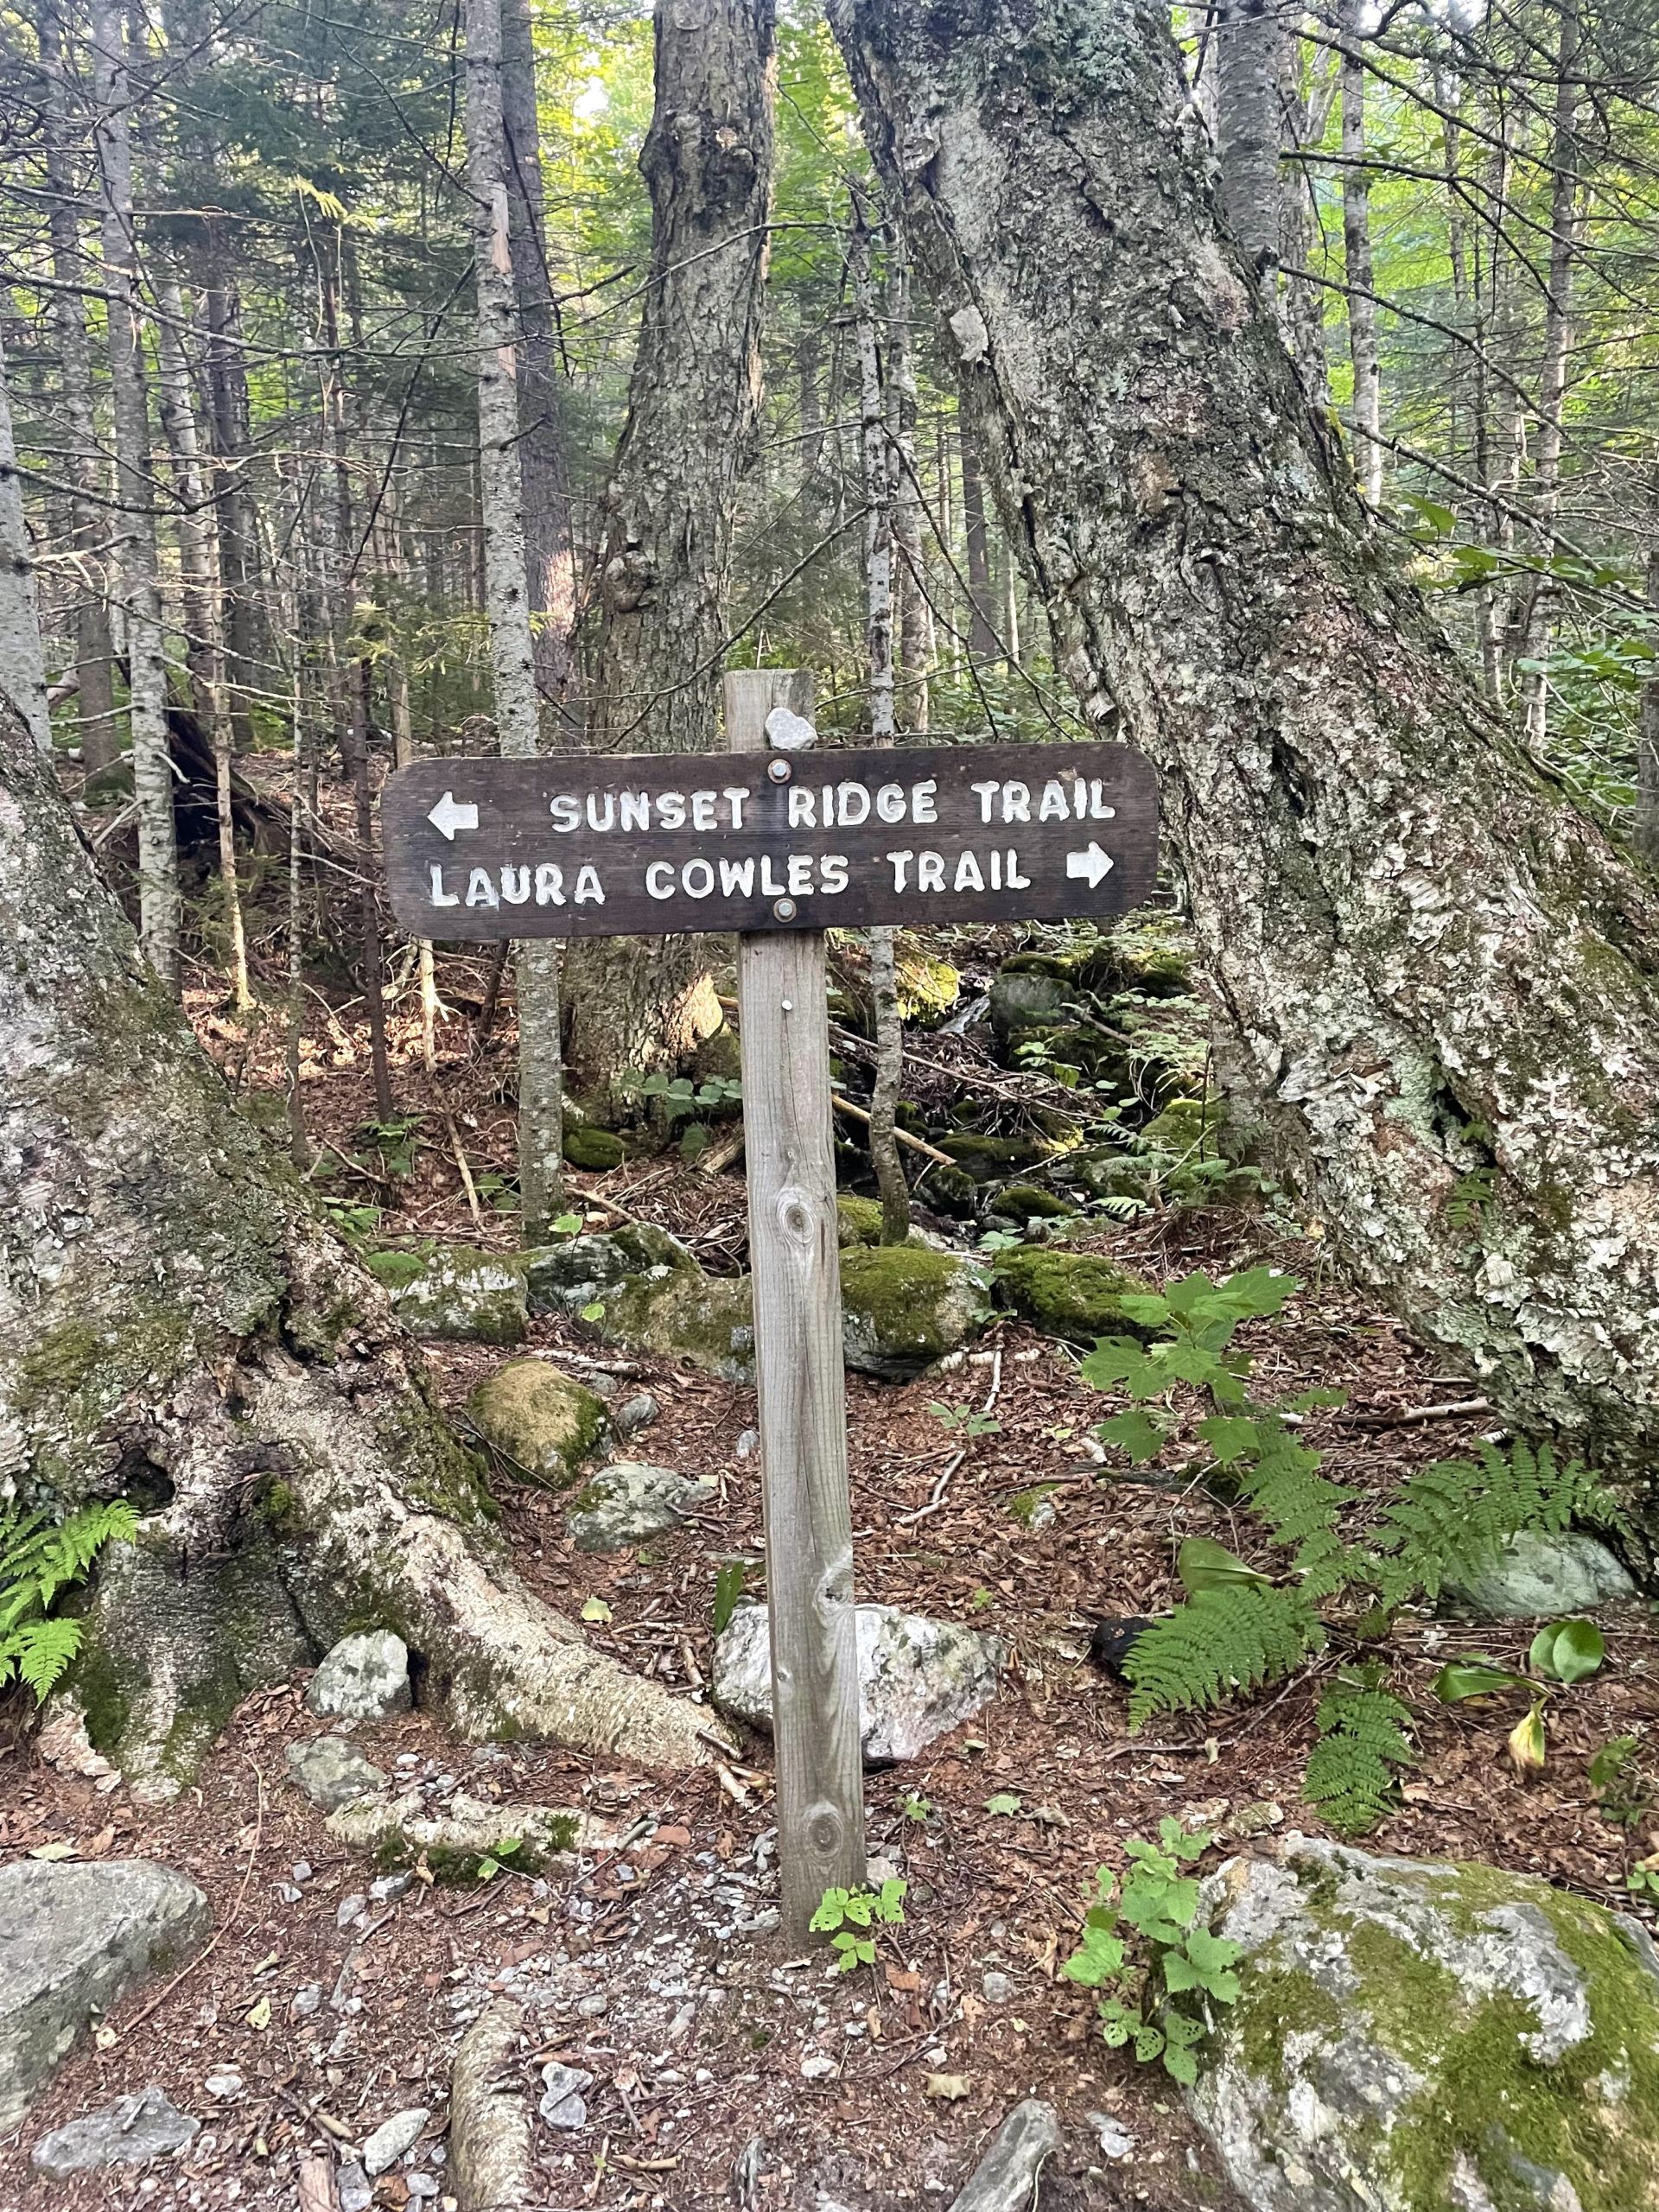 Trail sign, seen while hiking Mt. Mansfield in the Green Mountains, Vermont